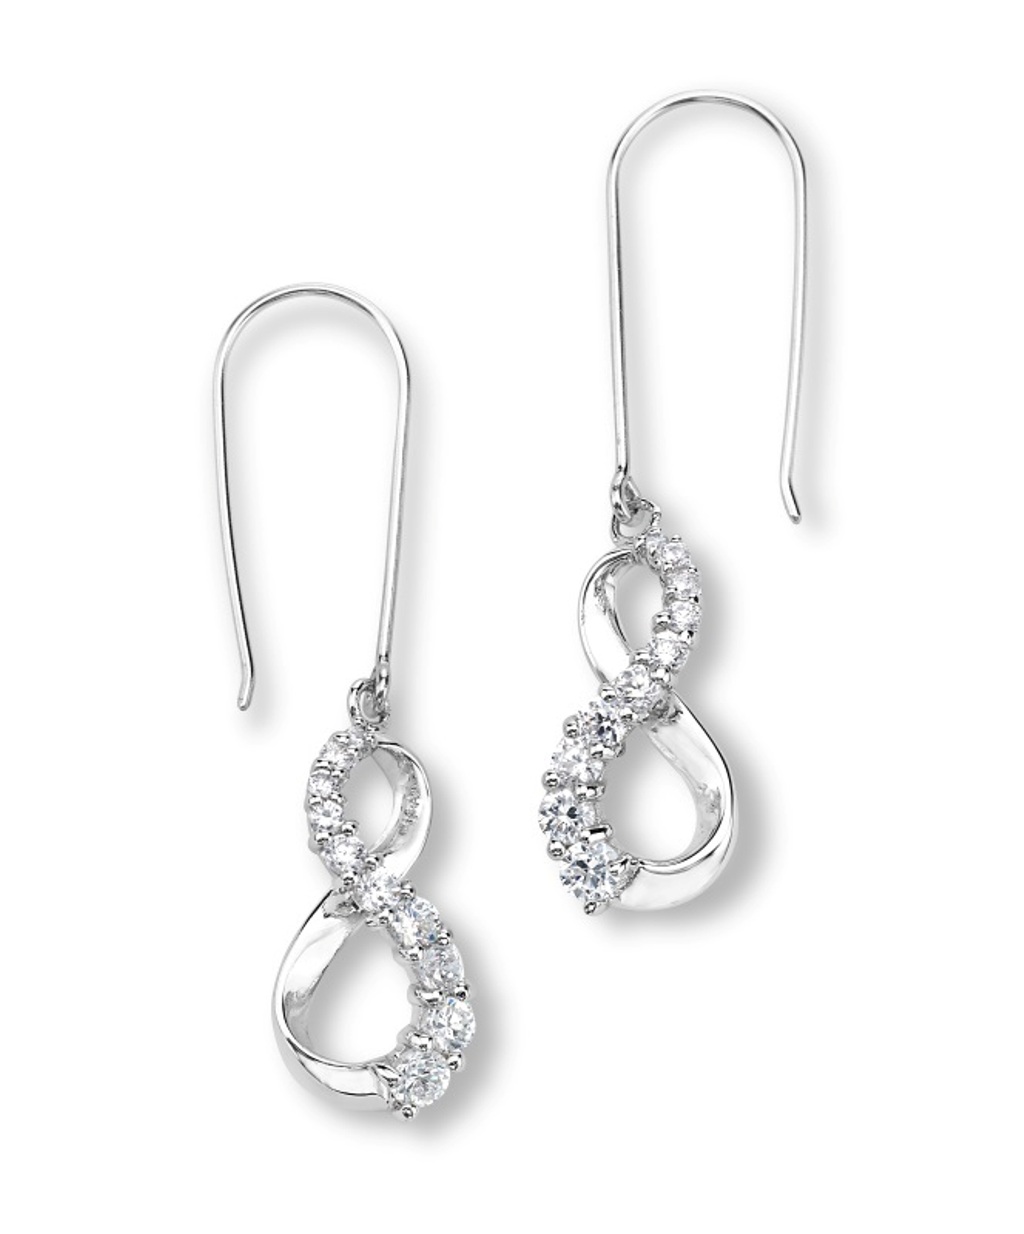 Graduated CZ Infinity Earrings, Rhodium Plated Sterling Silver